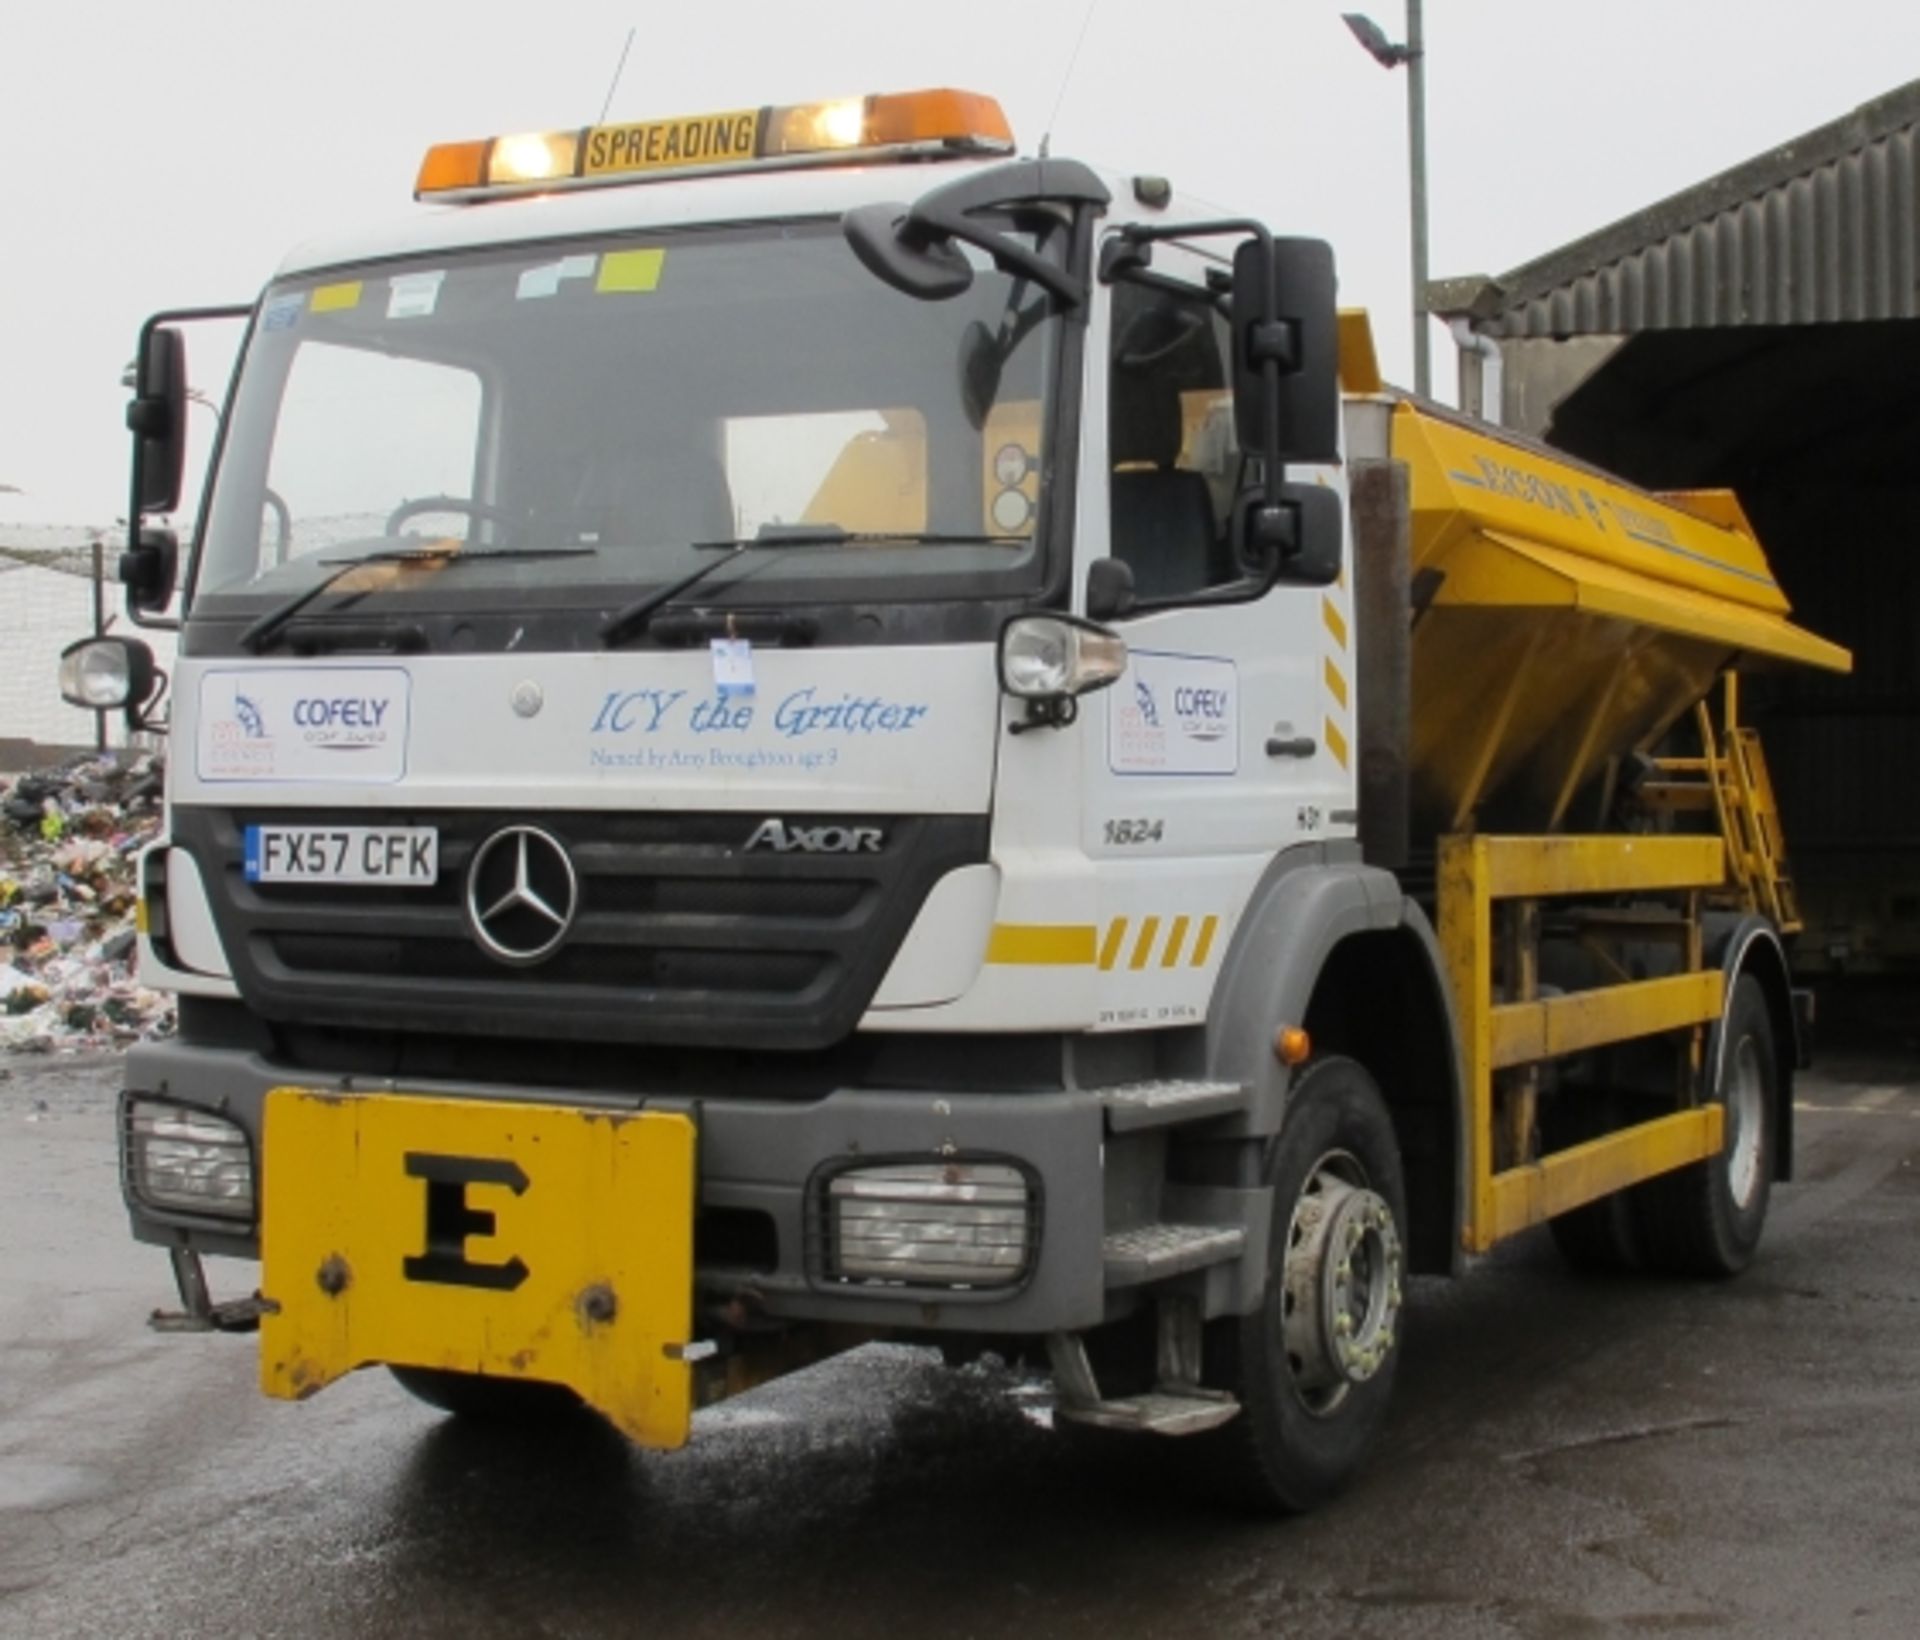 * Mercedes Axor 1824 18 Tonne 2WD Gritter Lorry with Econ Spreader Body, Reg FX57 CFK, Odometer Rea - Image 7 of 18